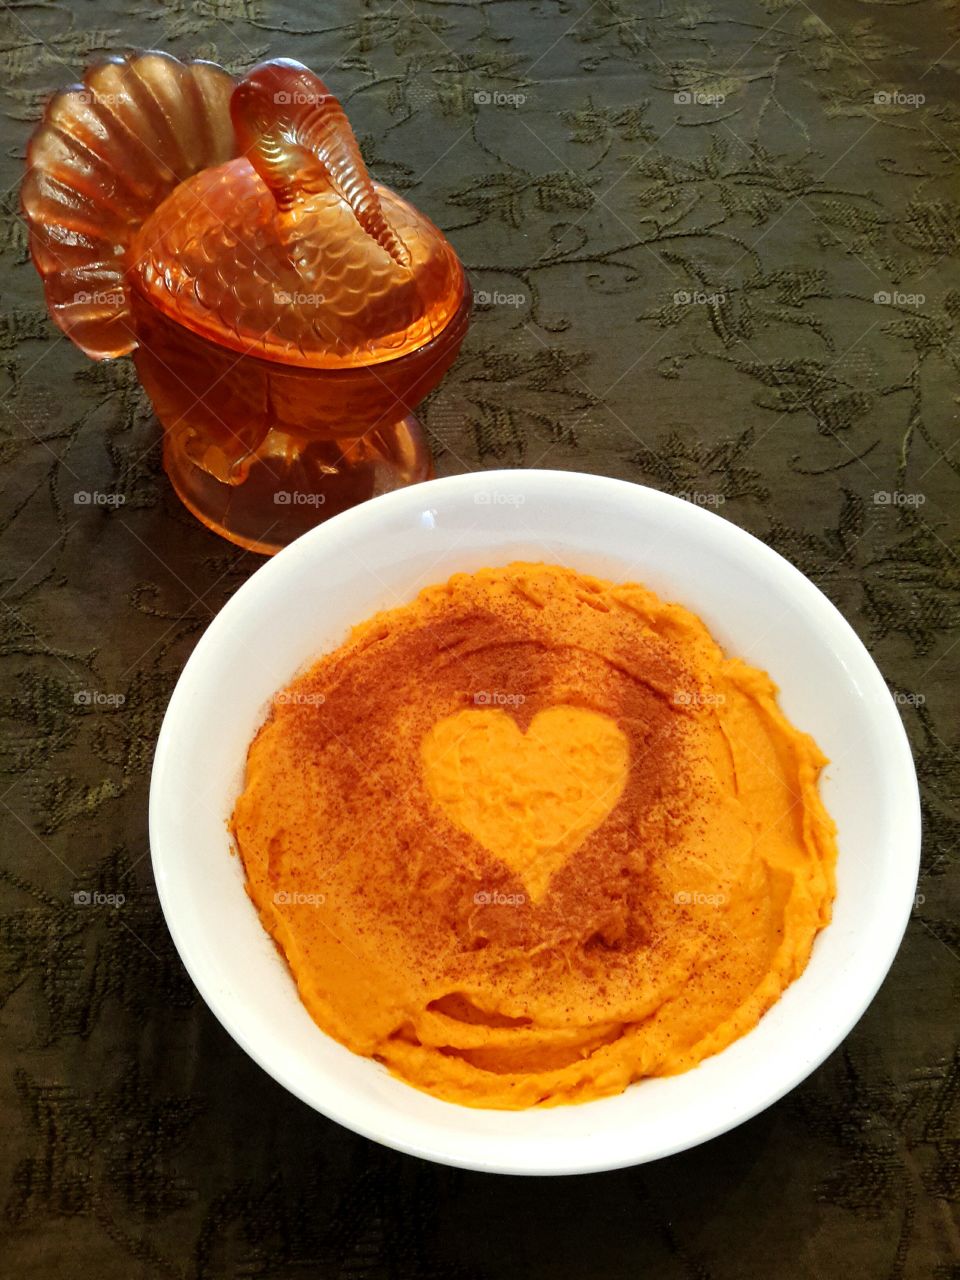 Sweet Potatoes or Yams, just one of the many flavors, colors and tastes of a Thanksgiving feast